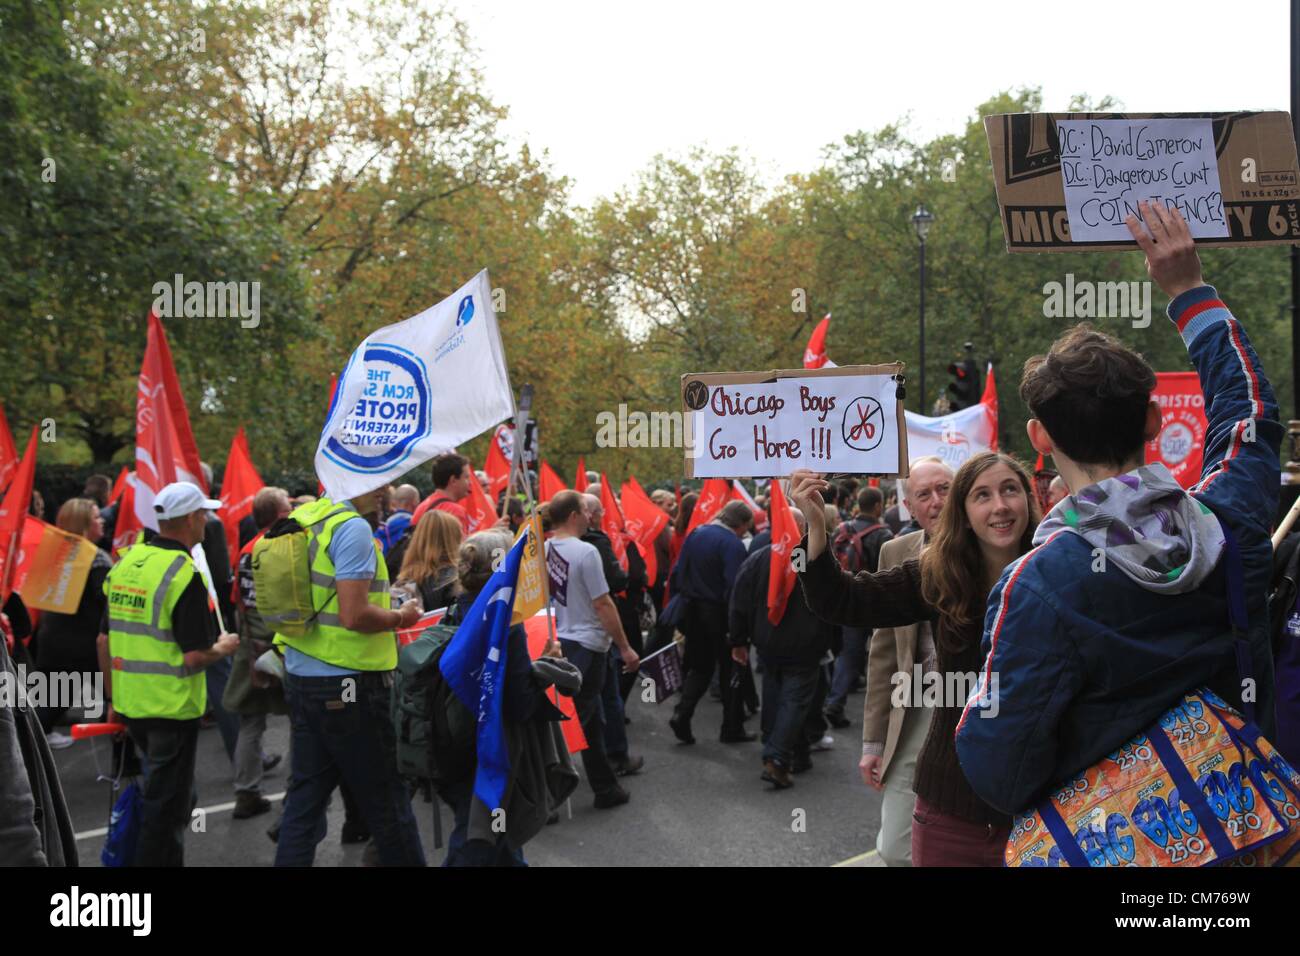 London, UK. 20th October 2012 Thousands gathered in Central London to join the march 'A Future that Works' organized by TUC. Credit:  nelson pereira / Alamy Live News Stock Photo